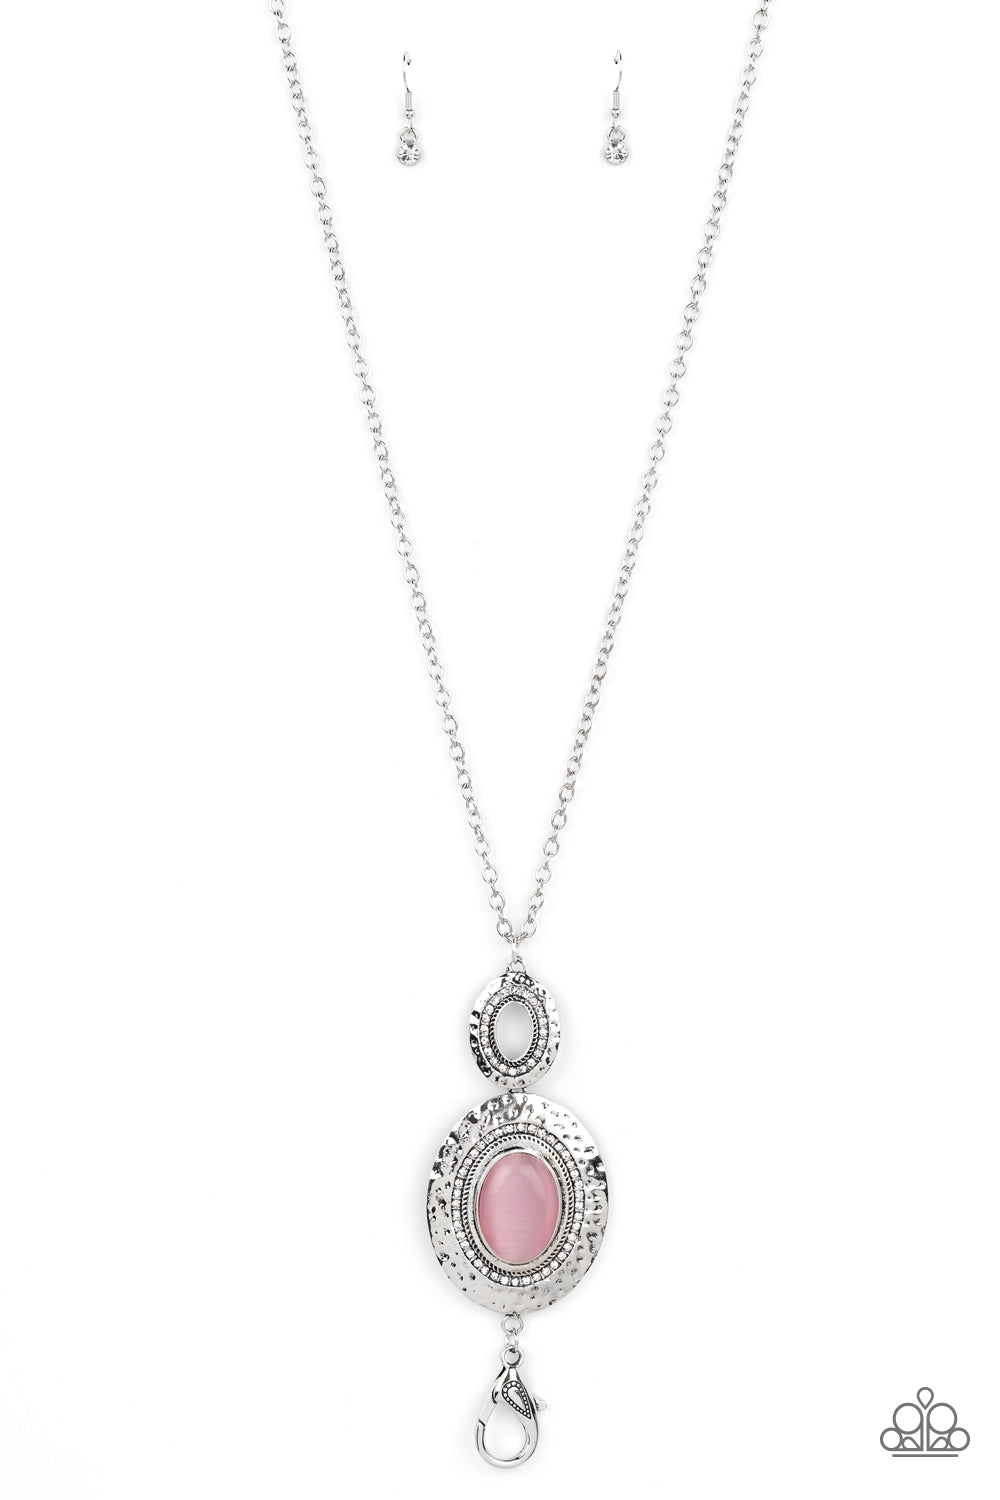 Paparazzi - Fairytale Finesse - Pink Necklace